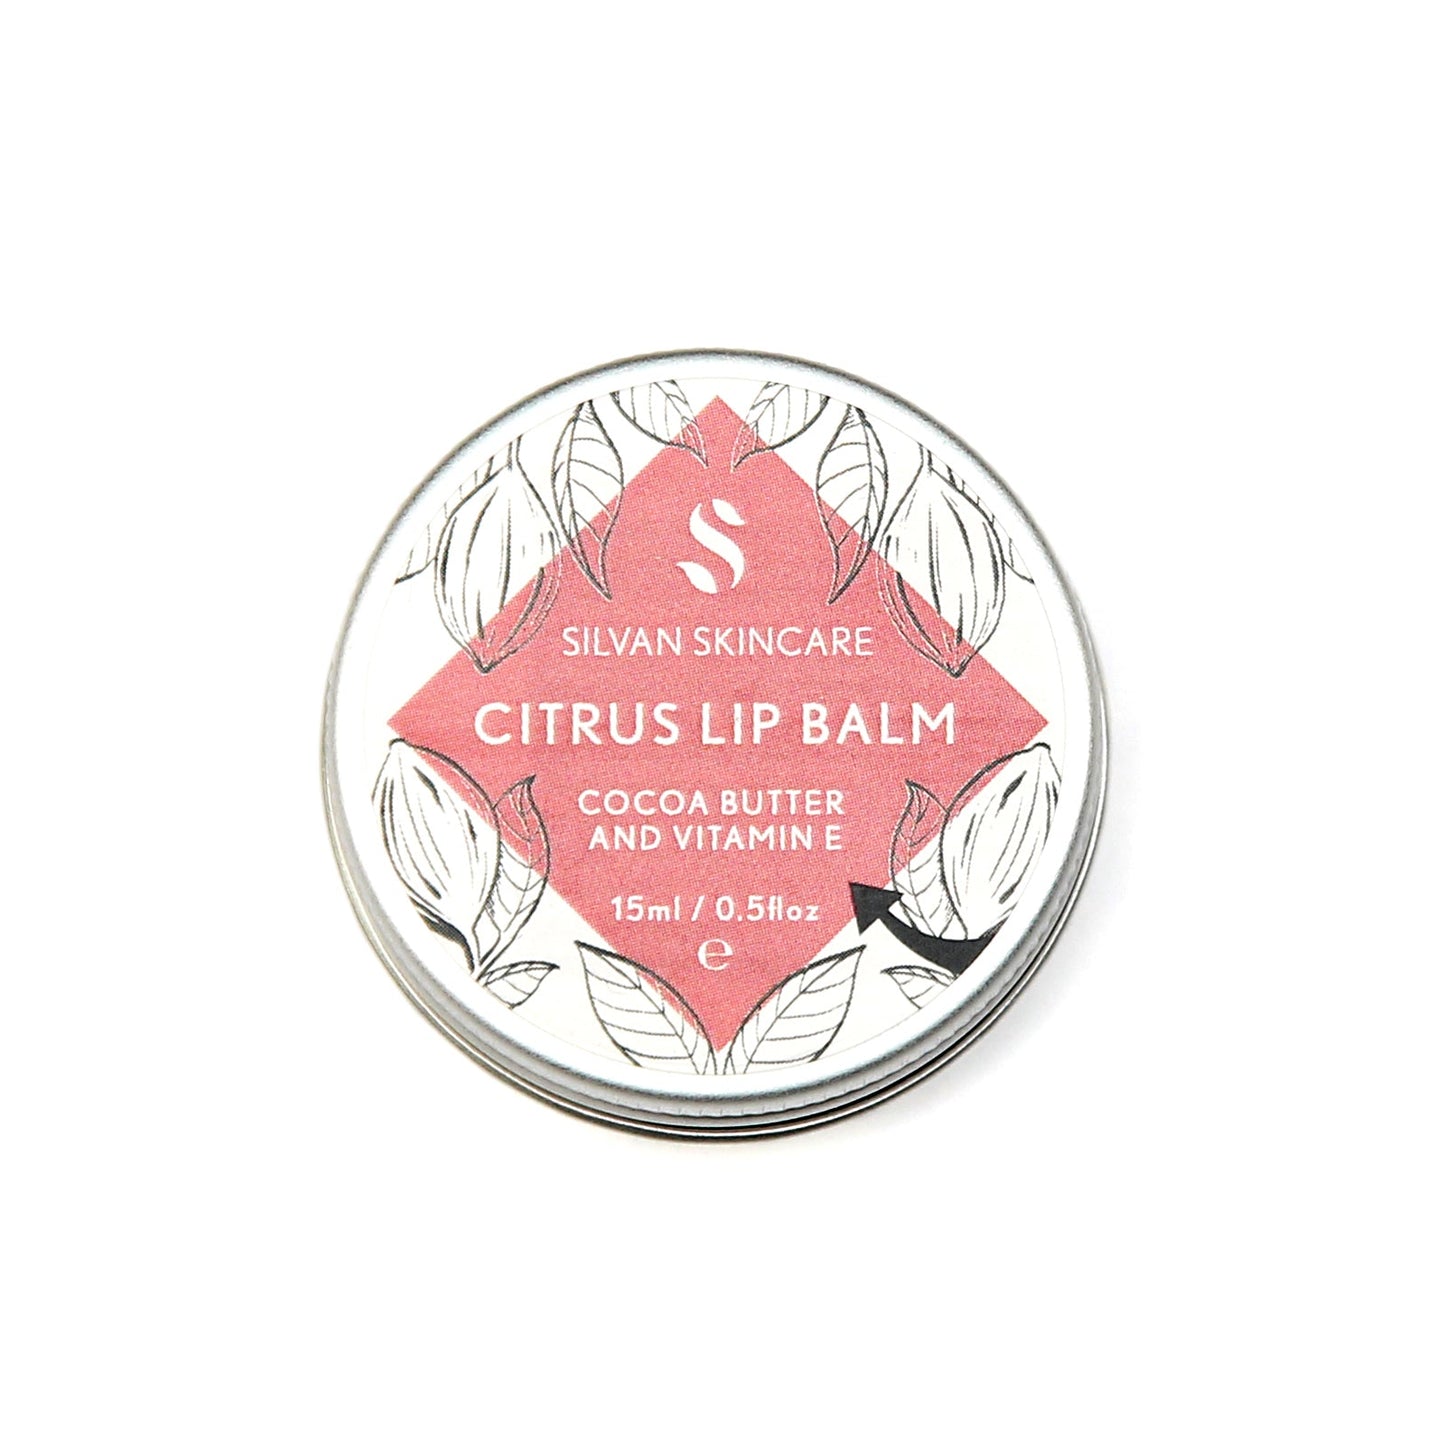 Single aluminium tin of the Silvan Skincare citrus lip balm. The label is round and white with a central diamond in pink and botanical illustrations around it.